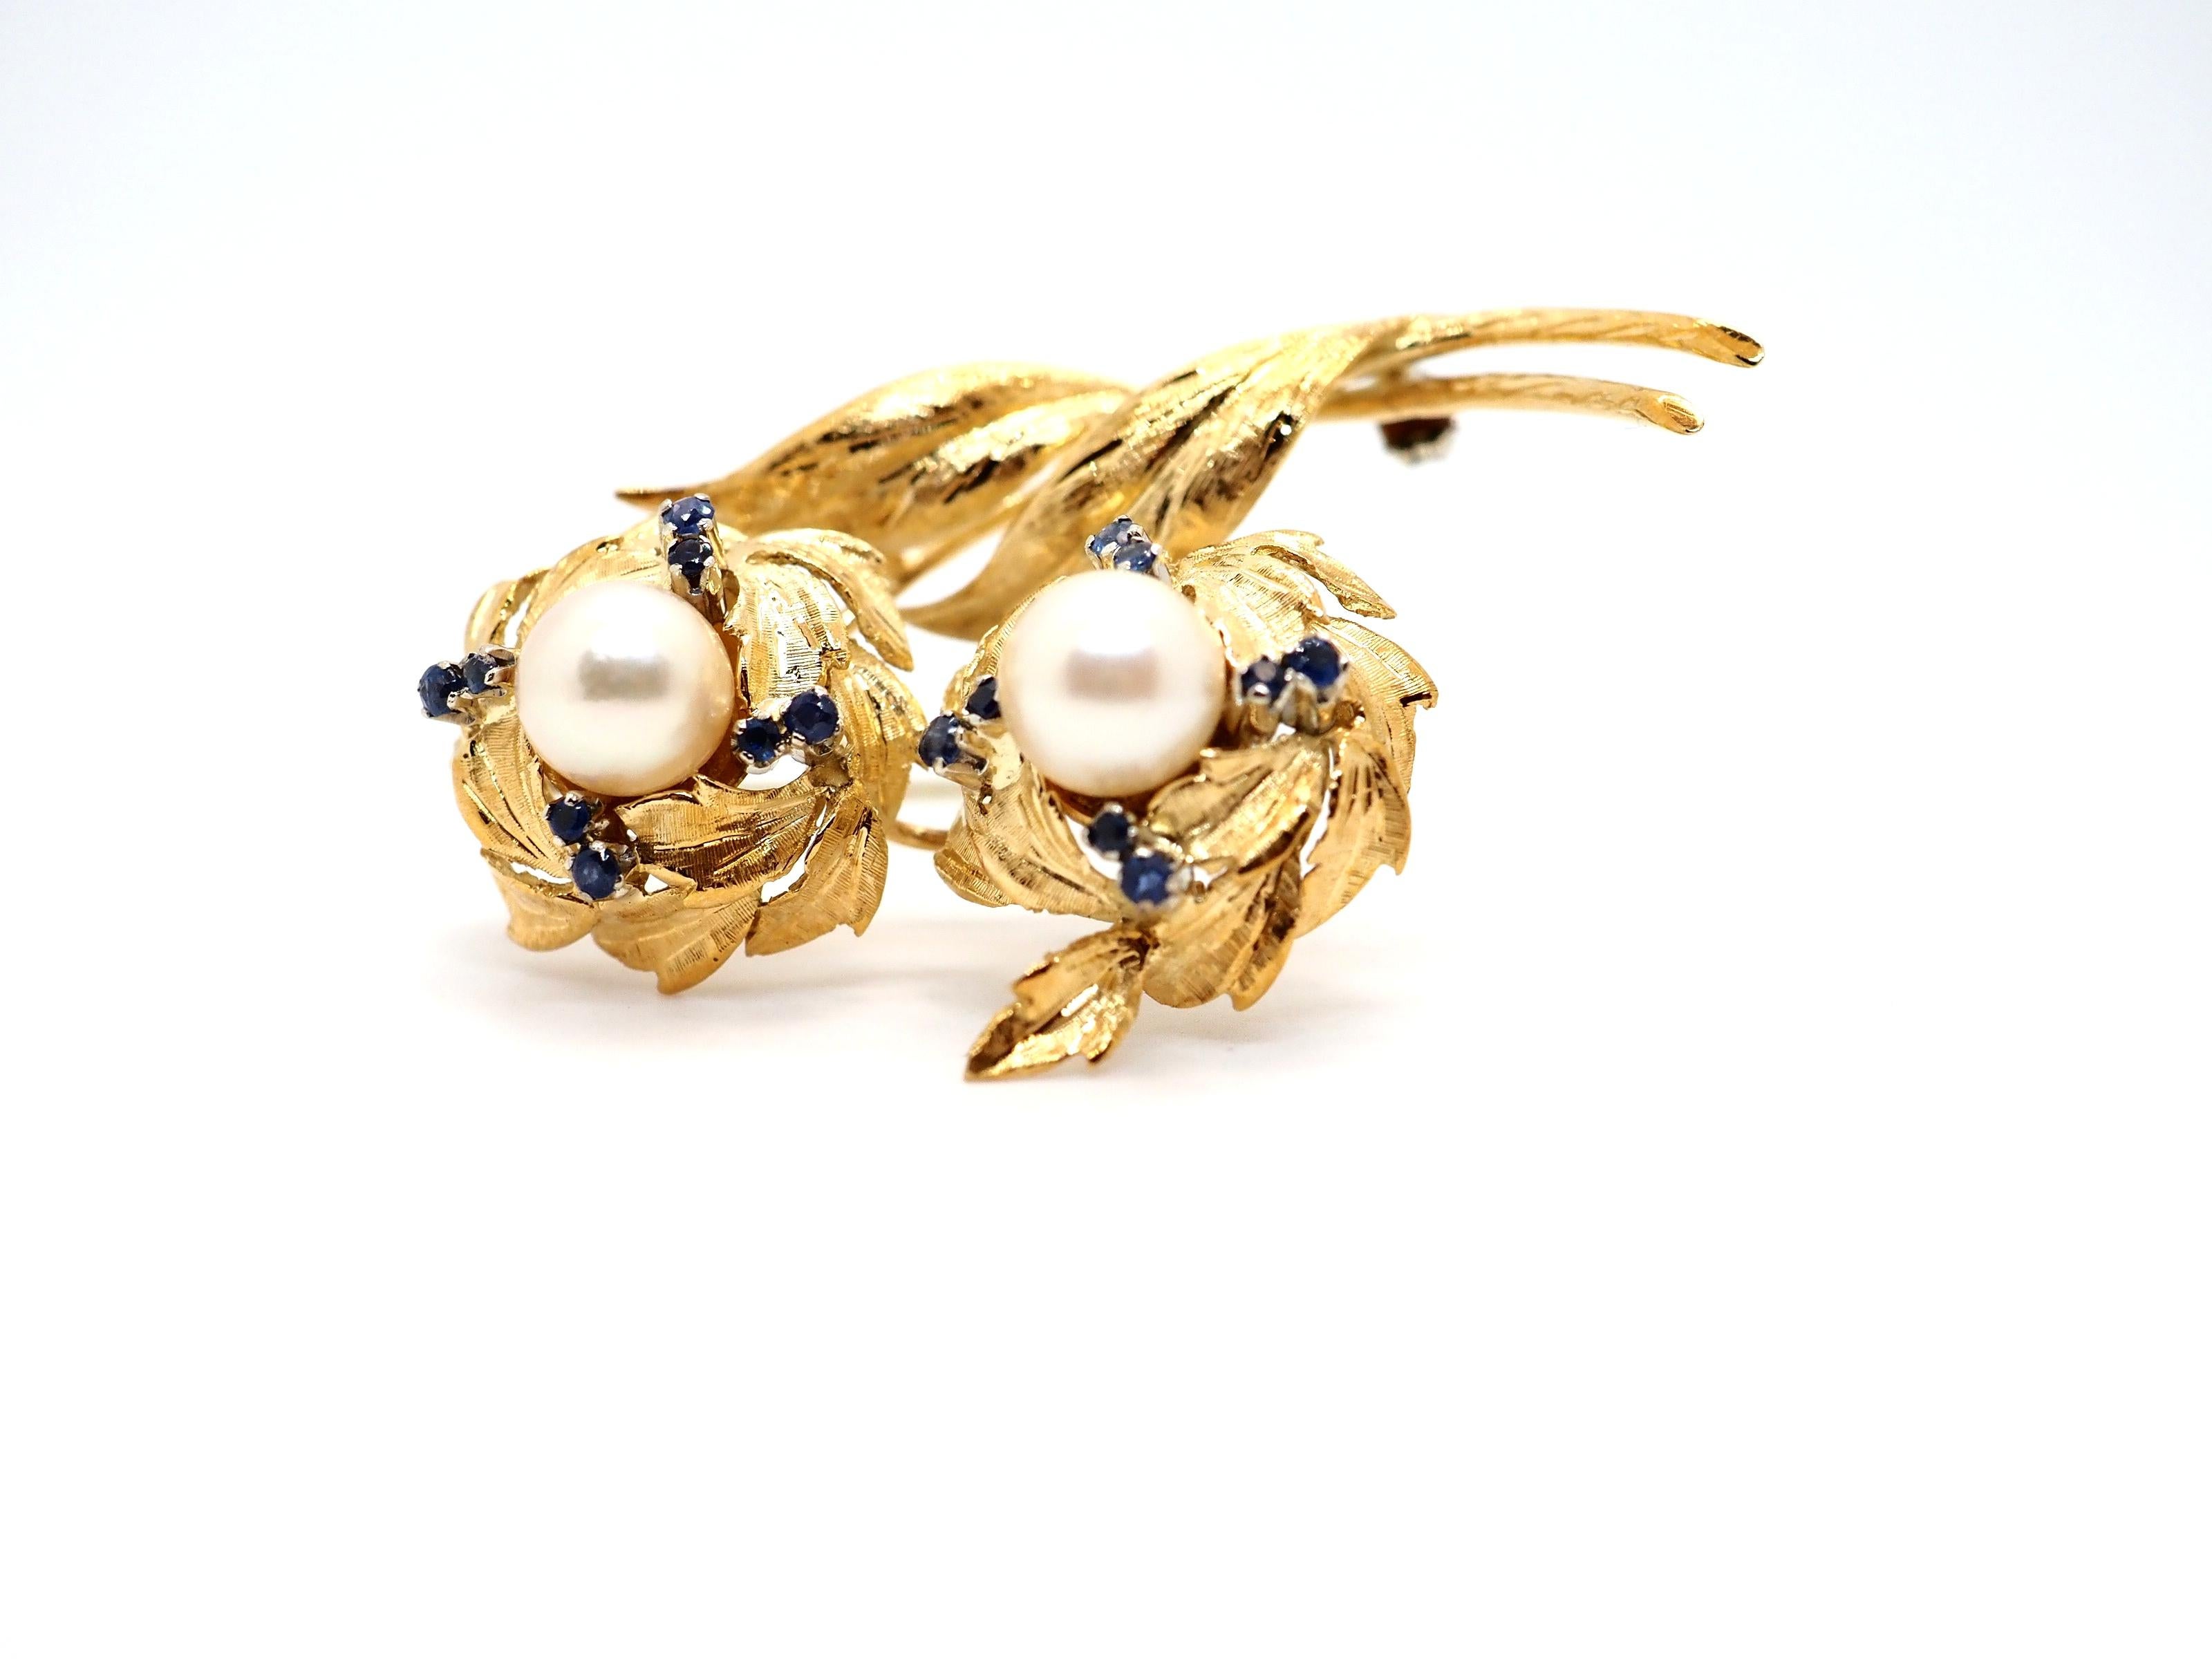 An elegant vintage brooch crafted in 18K yellow gold. It features 16 small sapphires and 2 pearls. The designs of this item was inspired by nature. And this theme was very popular during the 50s and 60s, when the brooch was created.

Total weight: